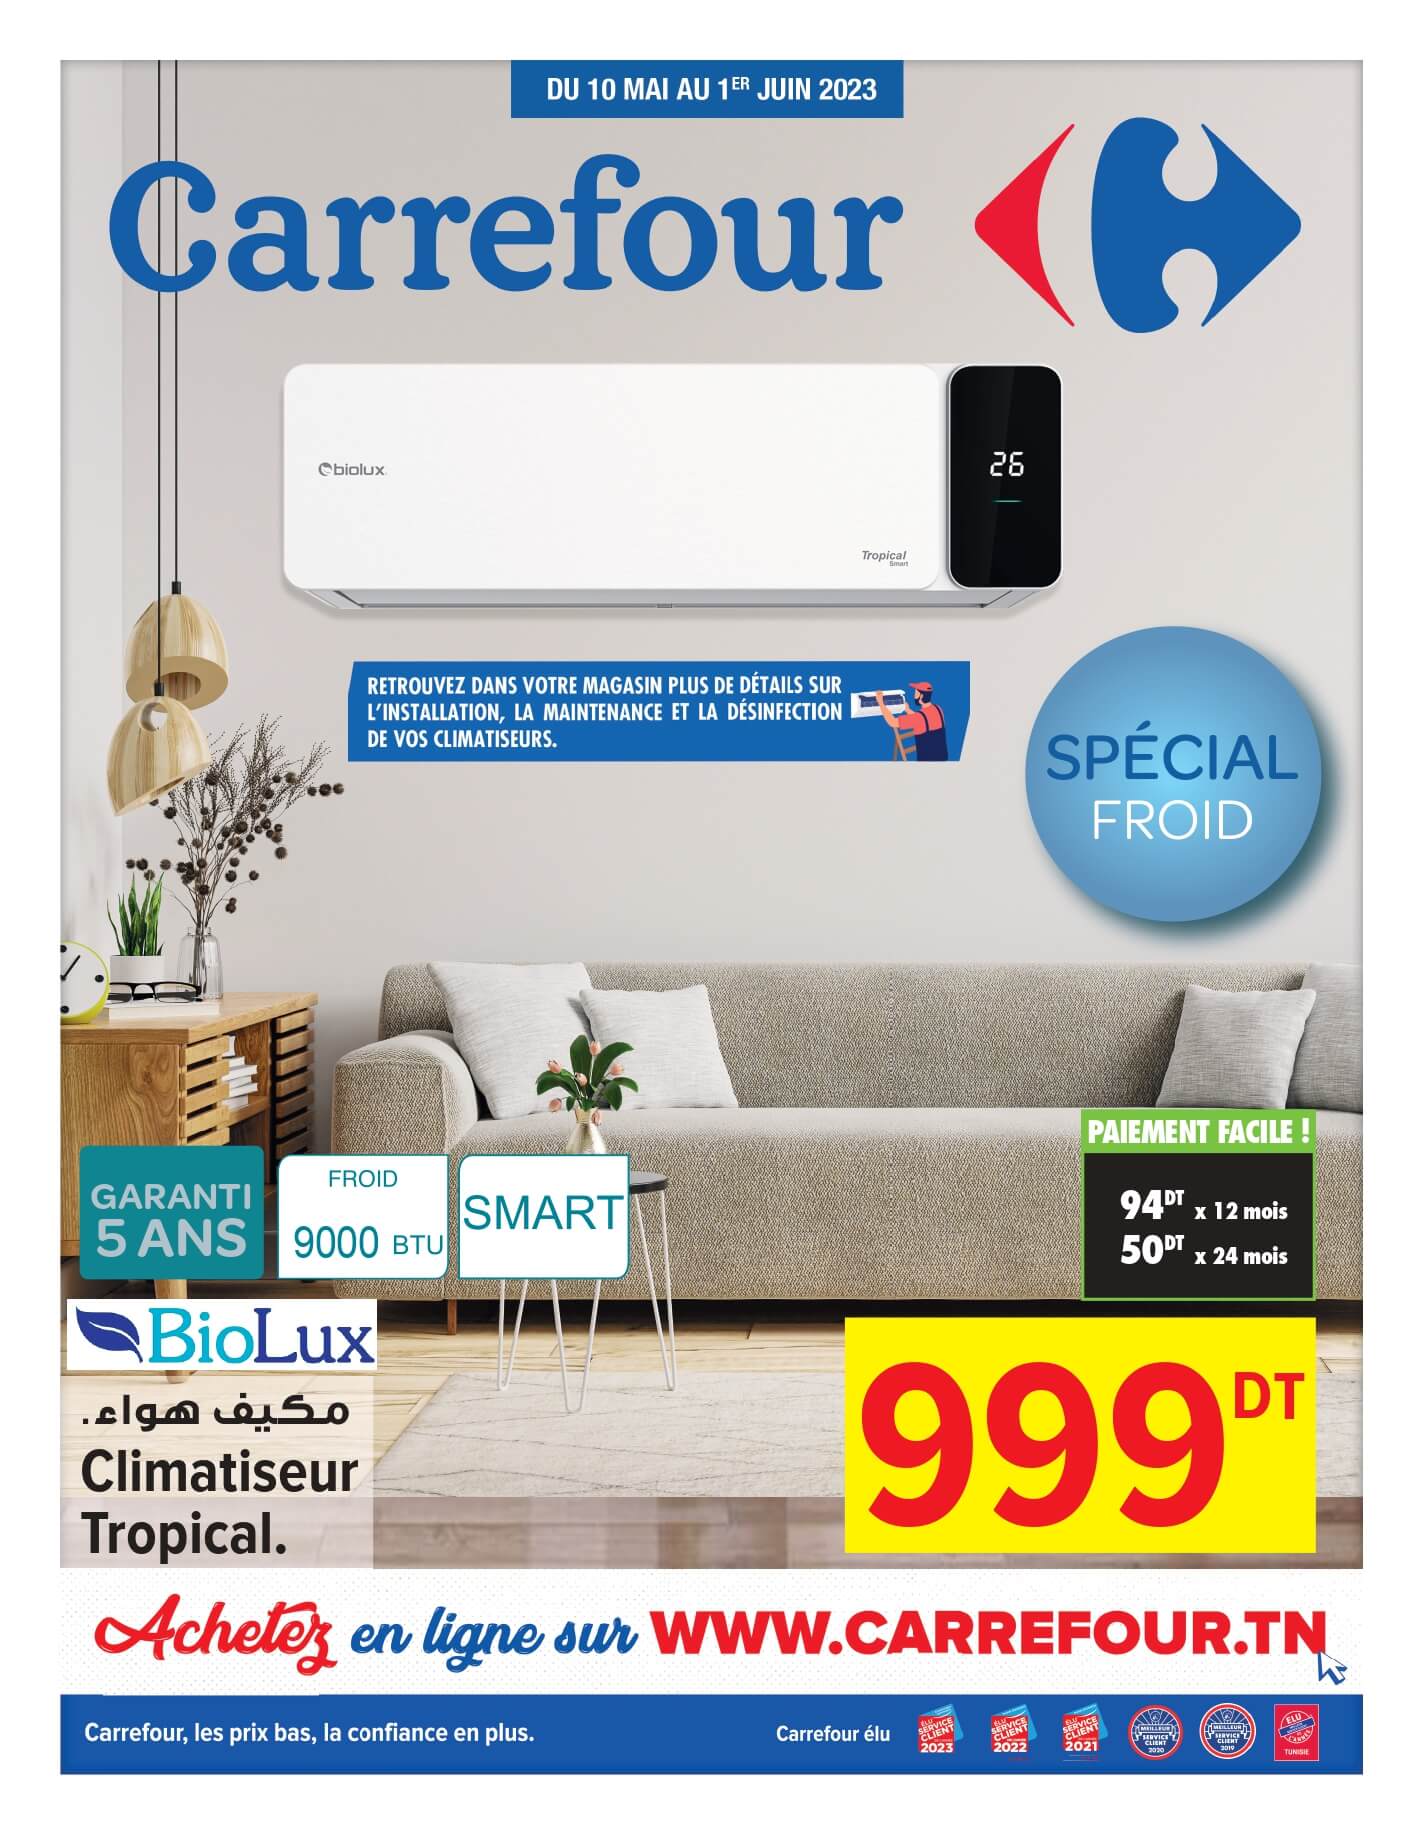 carrefour-special-froid